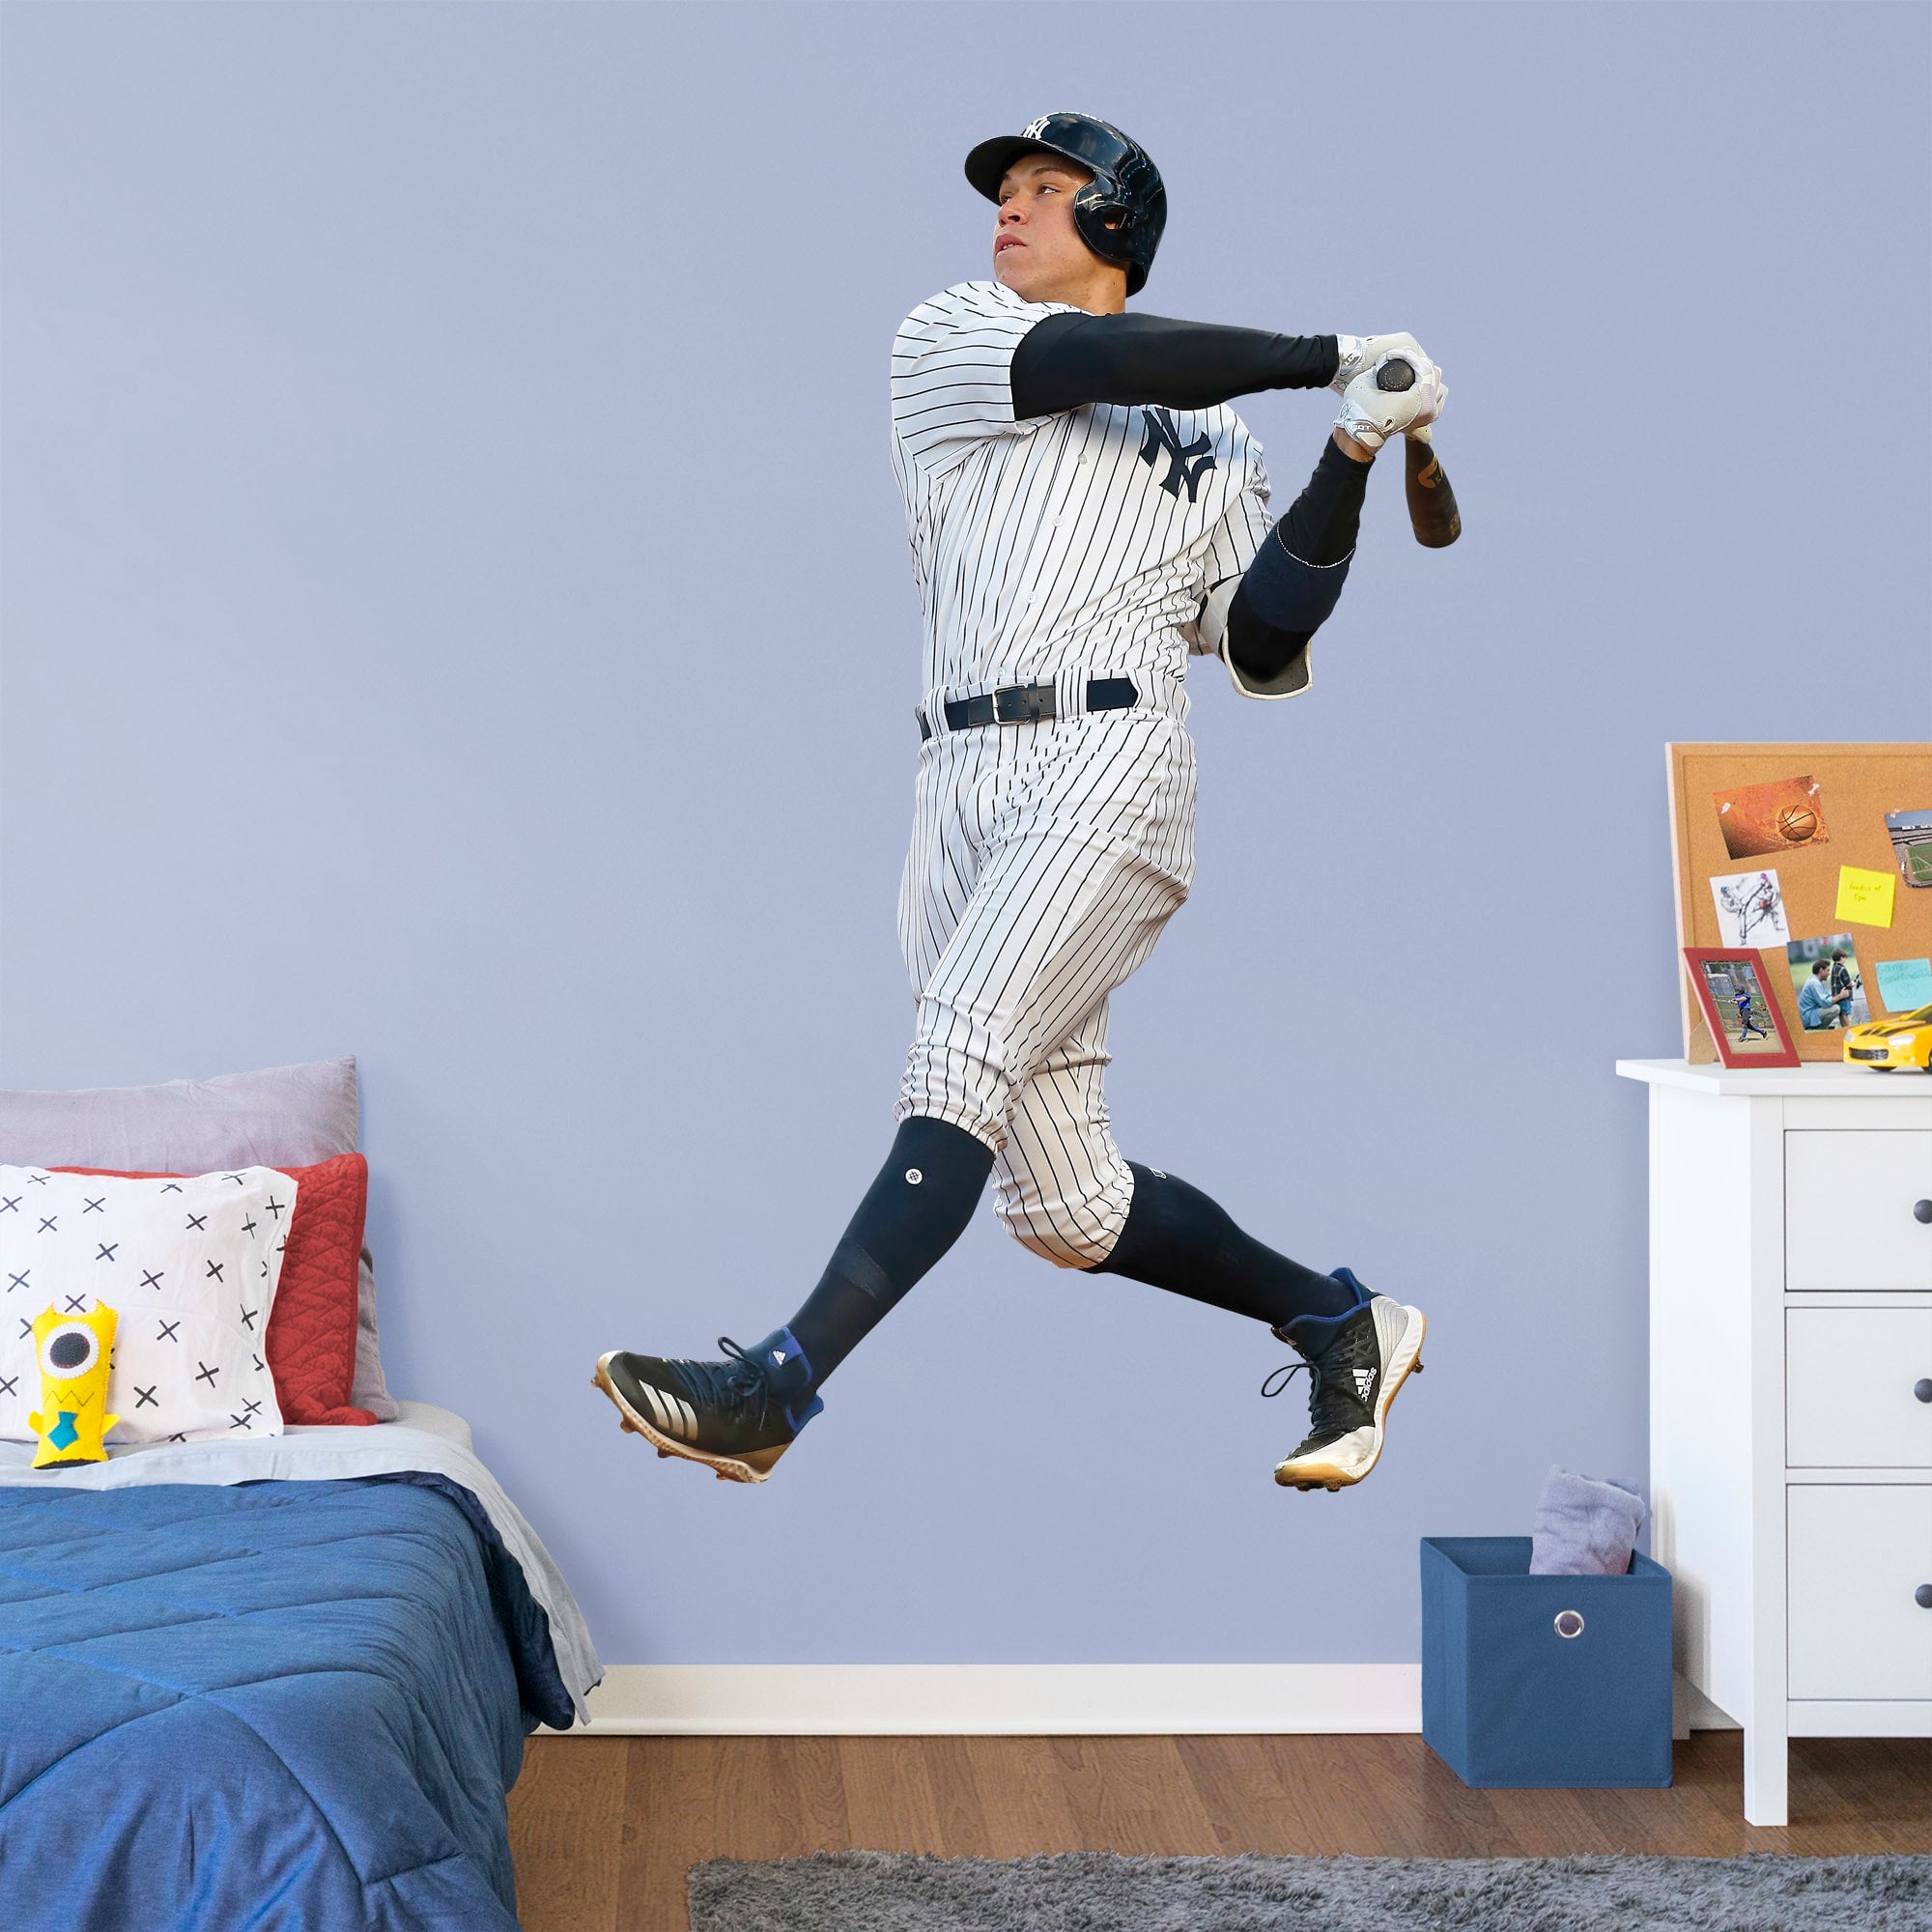 Aaron Judge for New York Yankees: Swing - Officially Licensed MLB Removable Wall Decal Life-Size Athlete + 2 Decals (49"W x 78"H